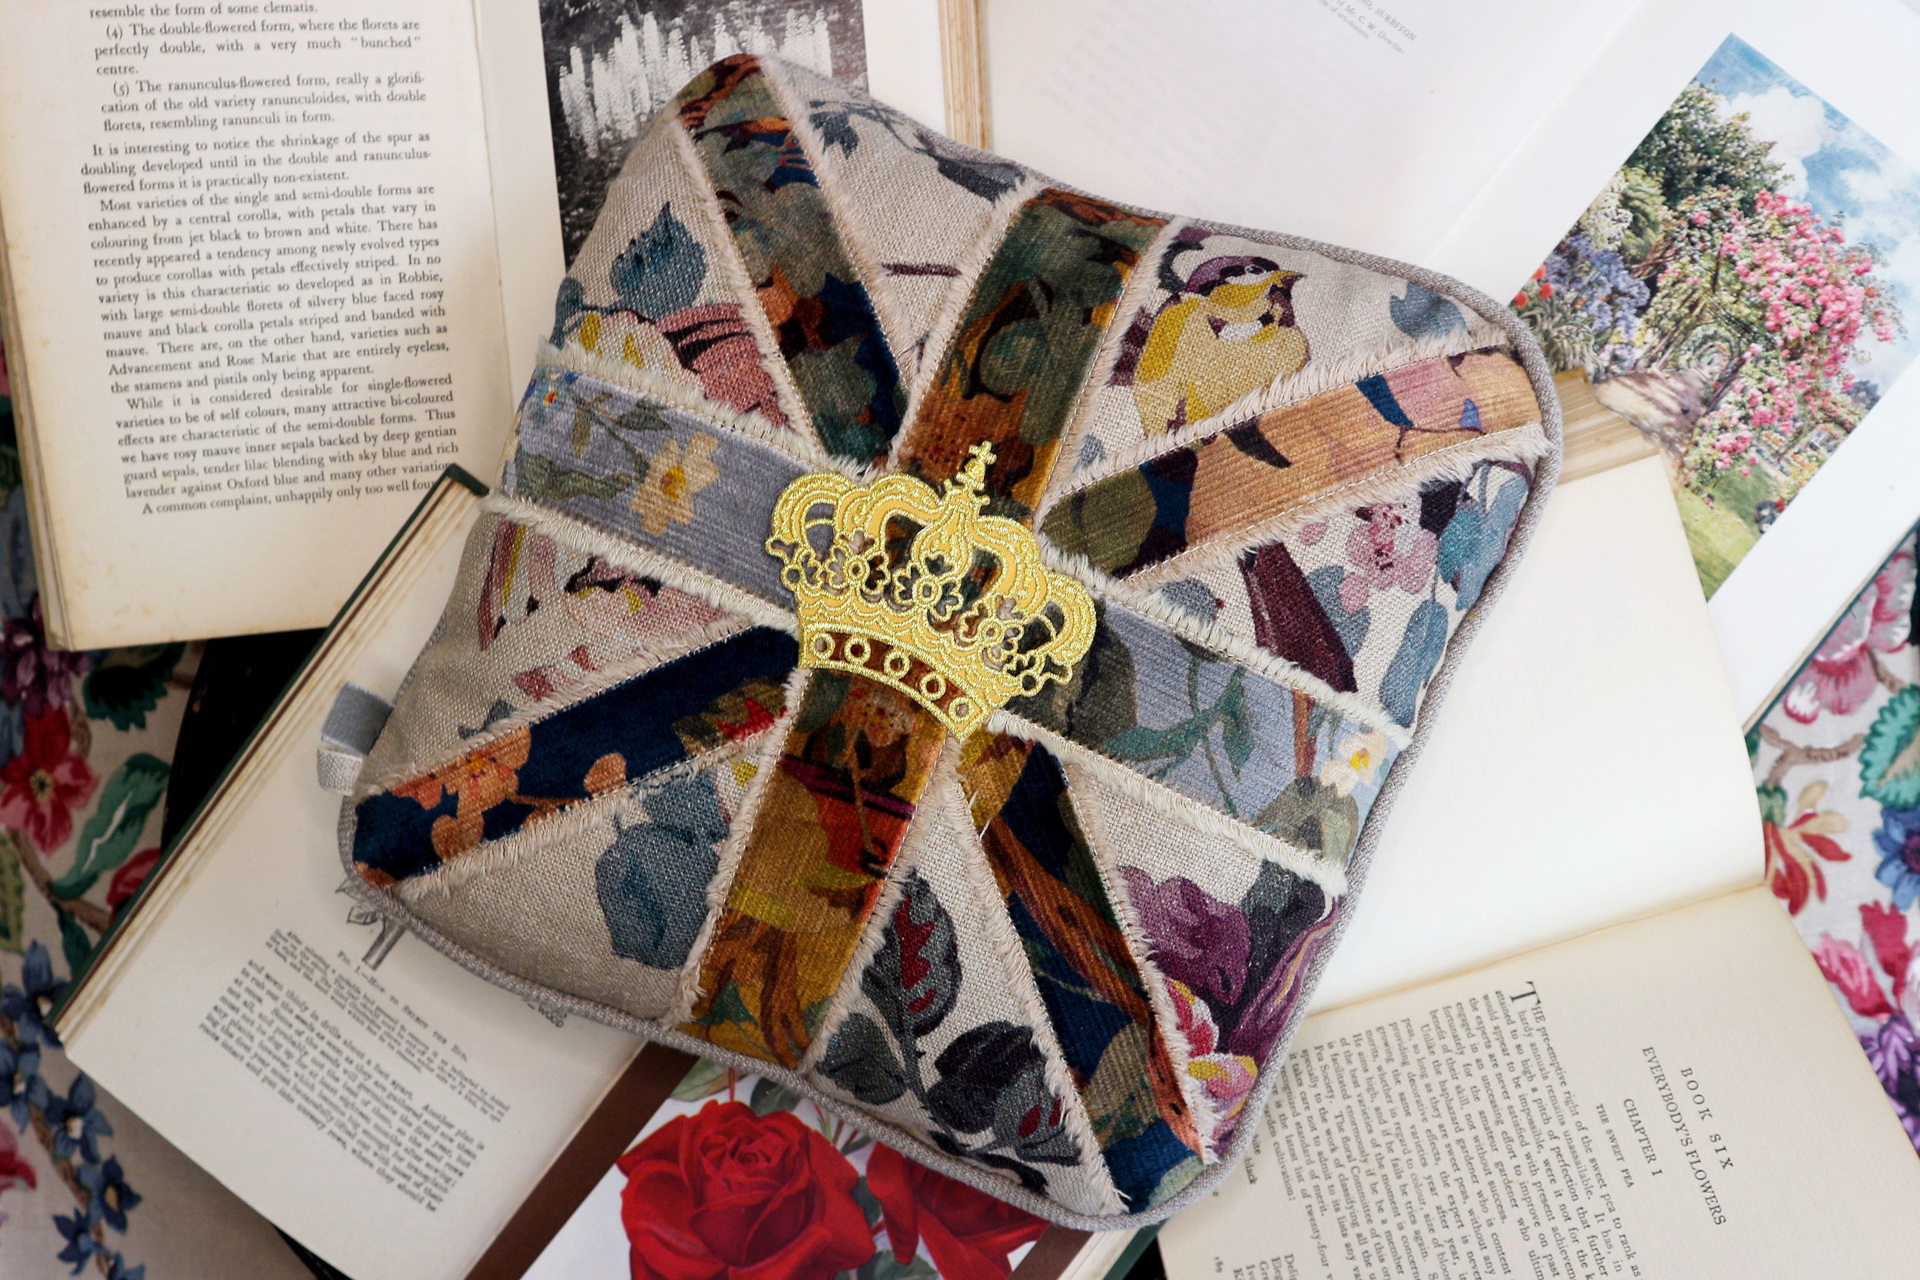 Patchwork cushion with crown and Union Jack design